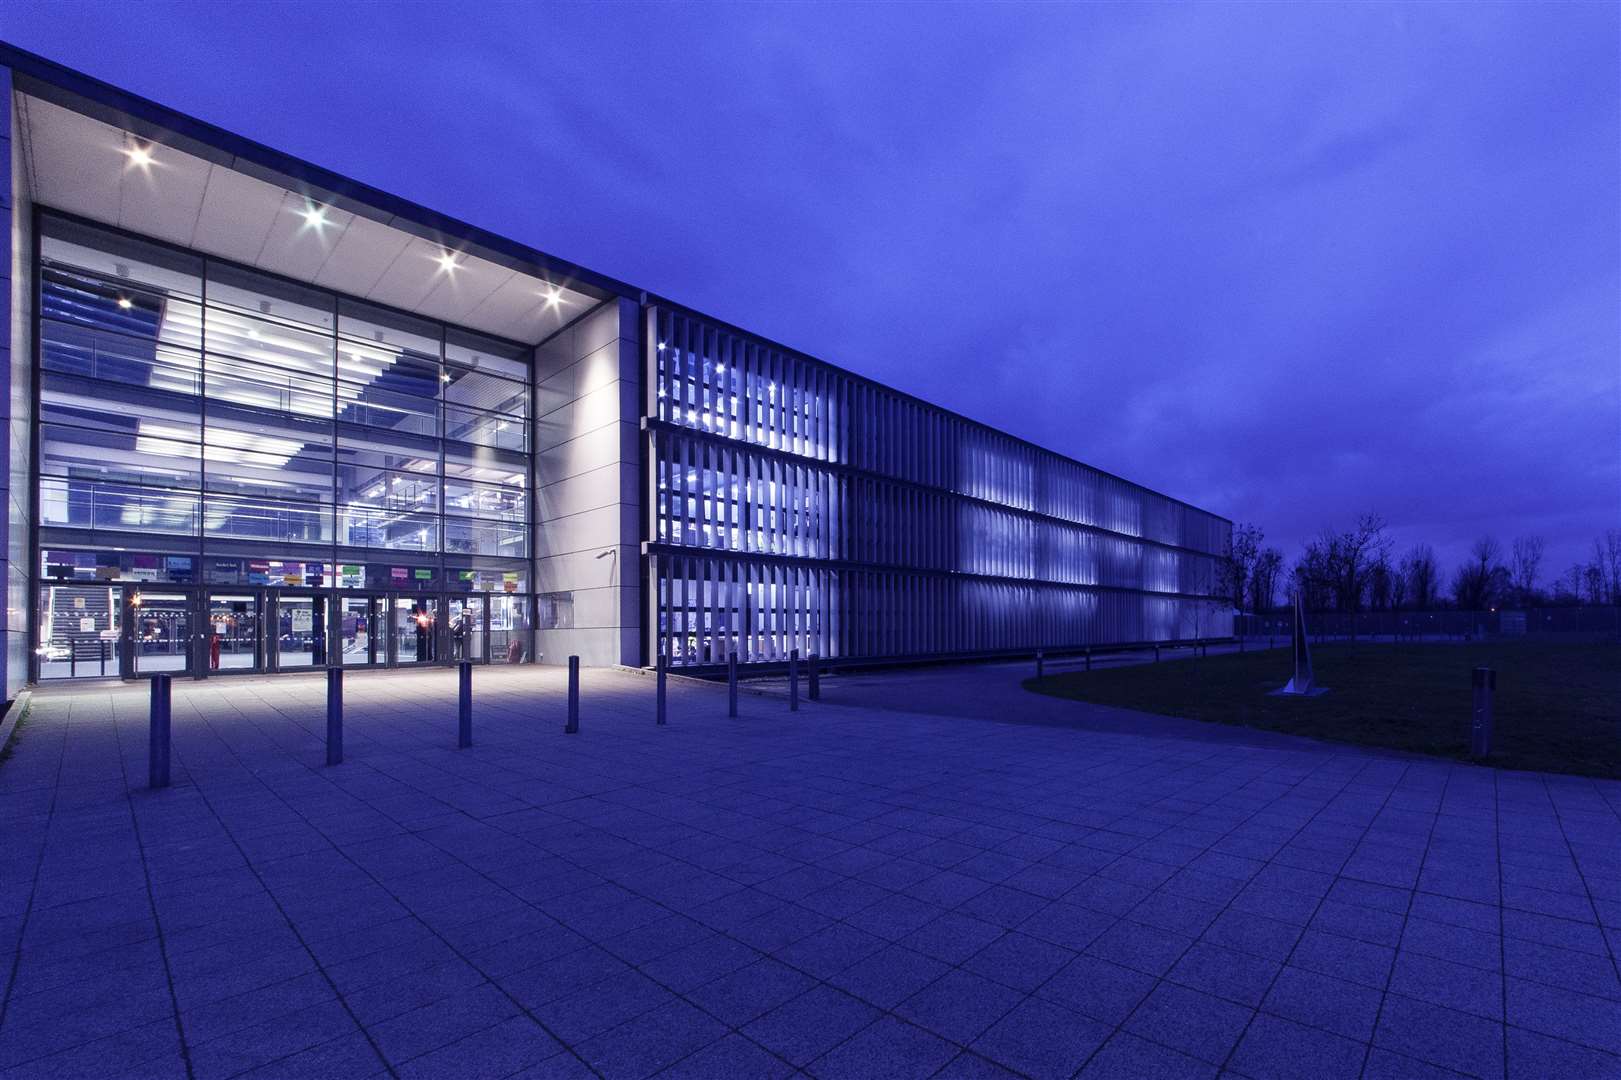 The Business Academy Bexley uses LED lighting installed by 8point3 in Dartford